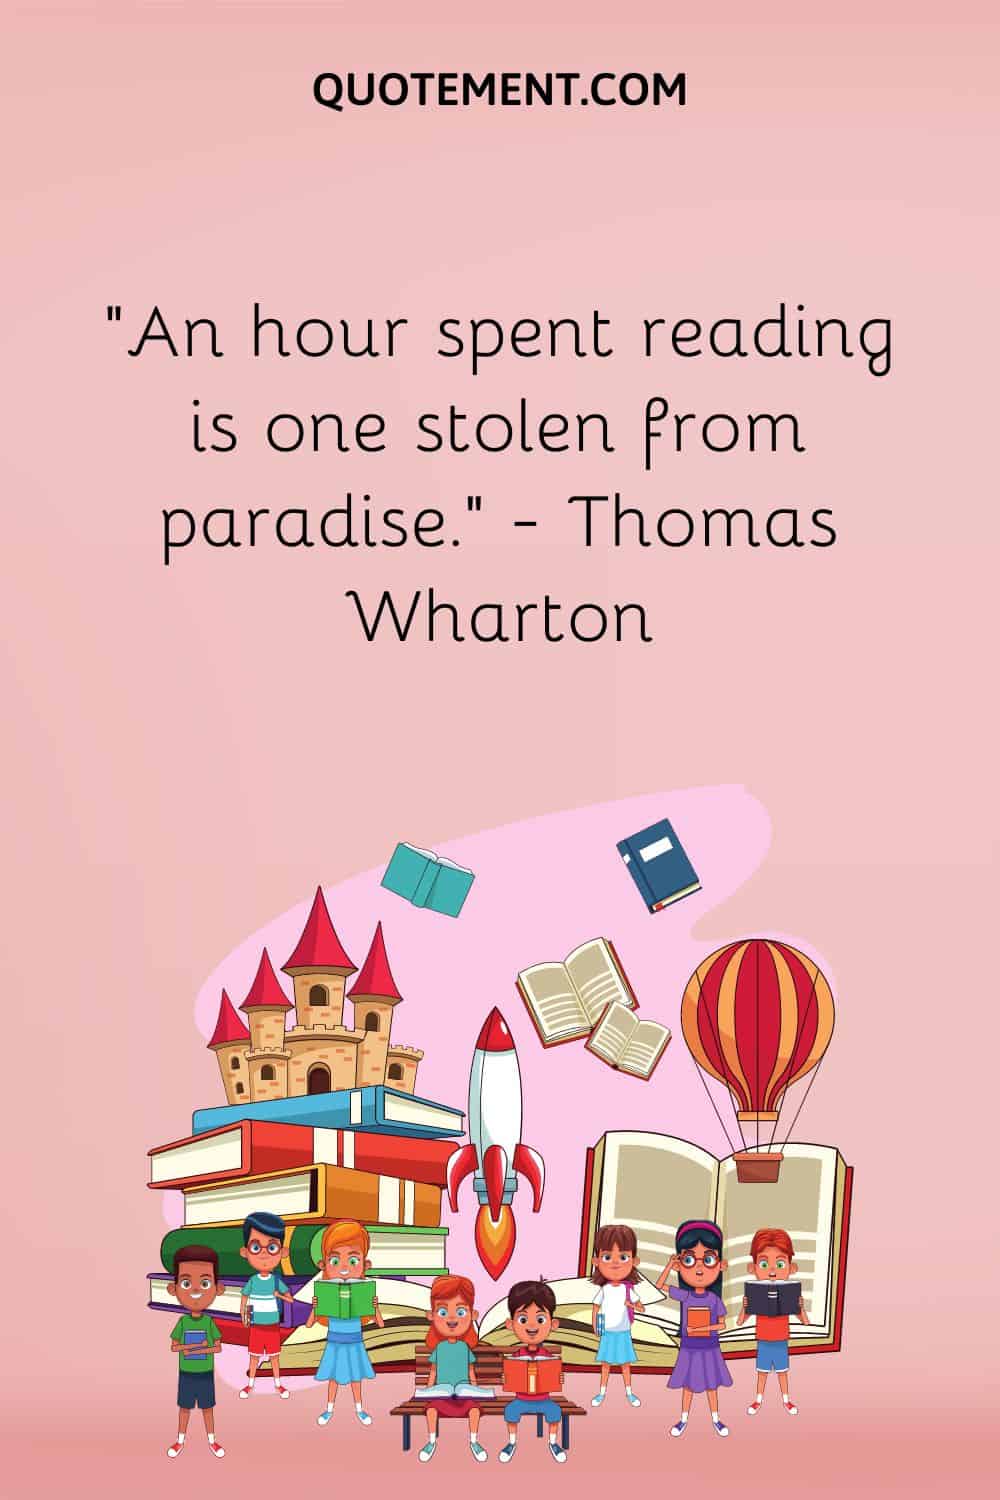 “An hour spent reading is one stolen from paradise.” — Thomas Wharton